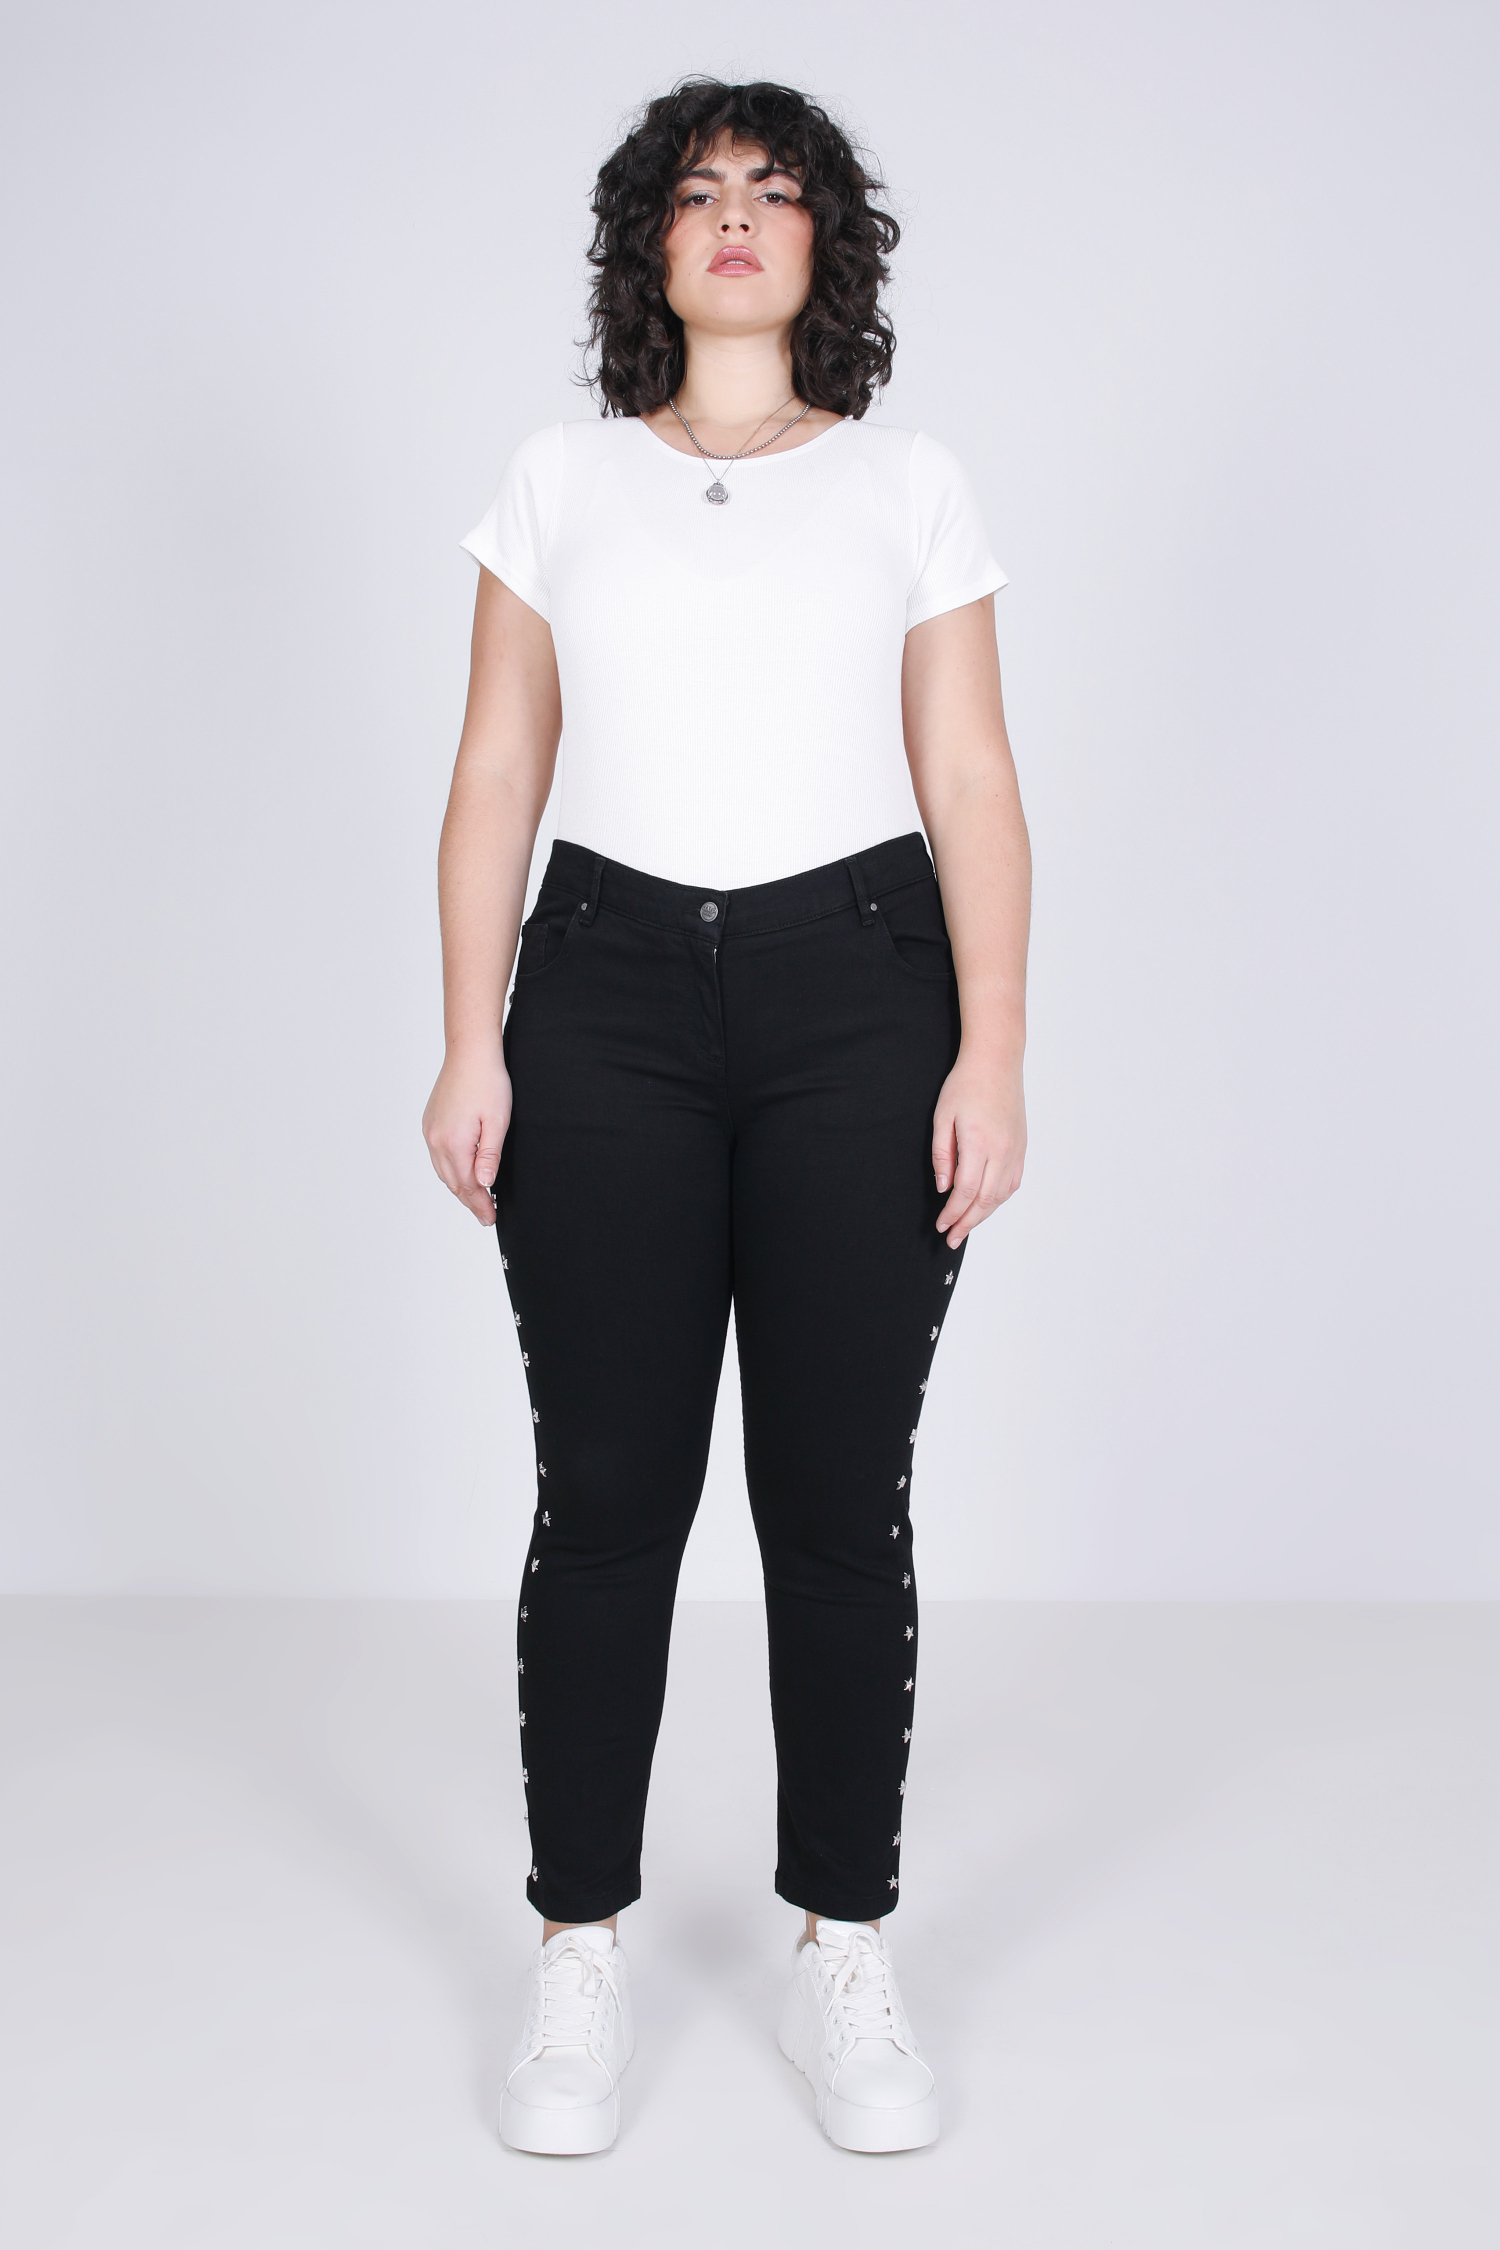 Black jeans with star-shaped studs